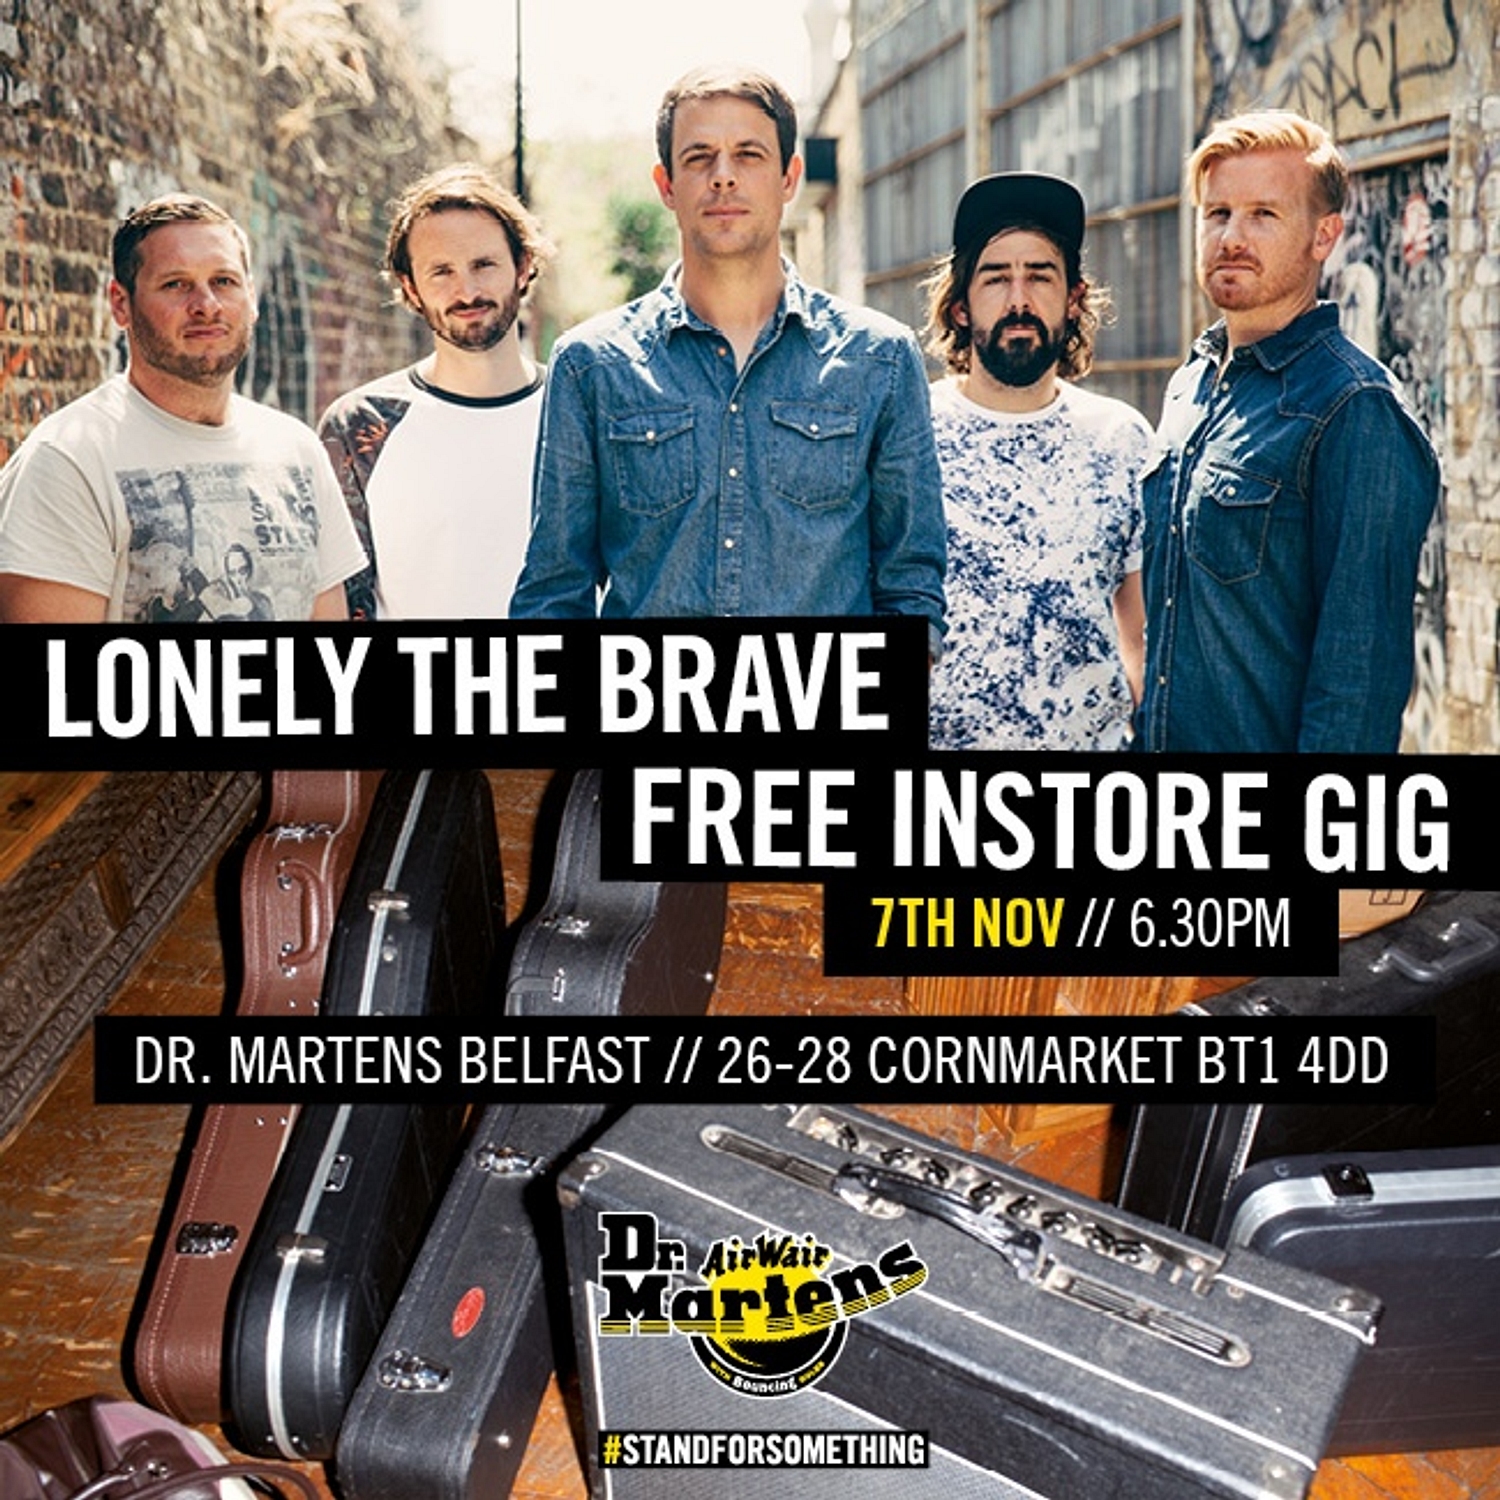 Lonely The Brave to perform at Belfast's Dr. Martens store this weekend